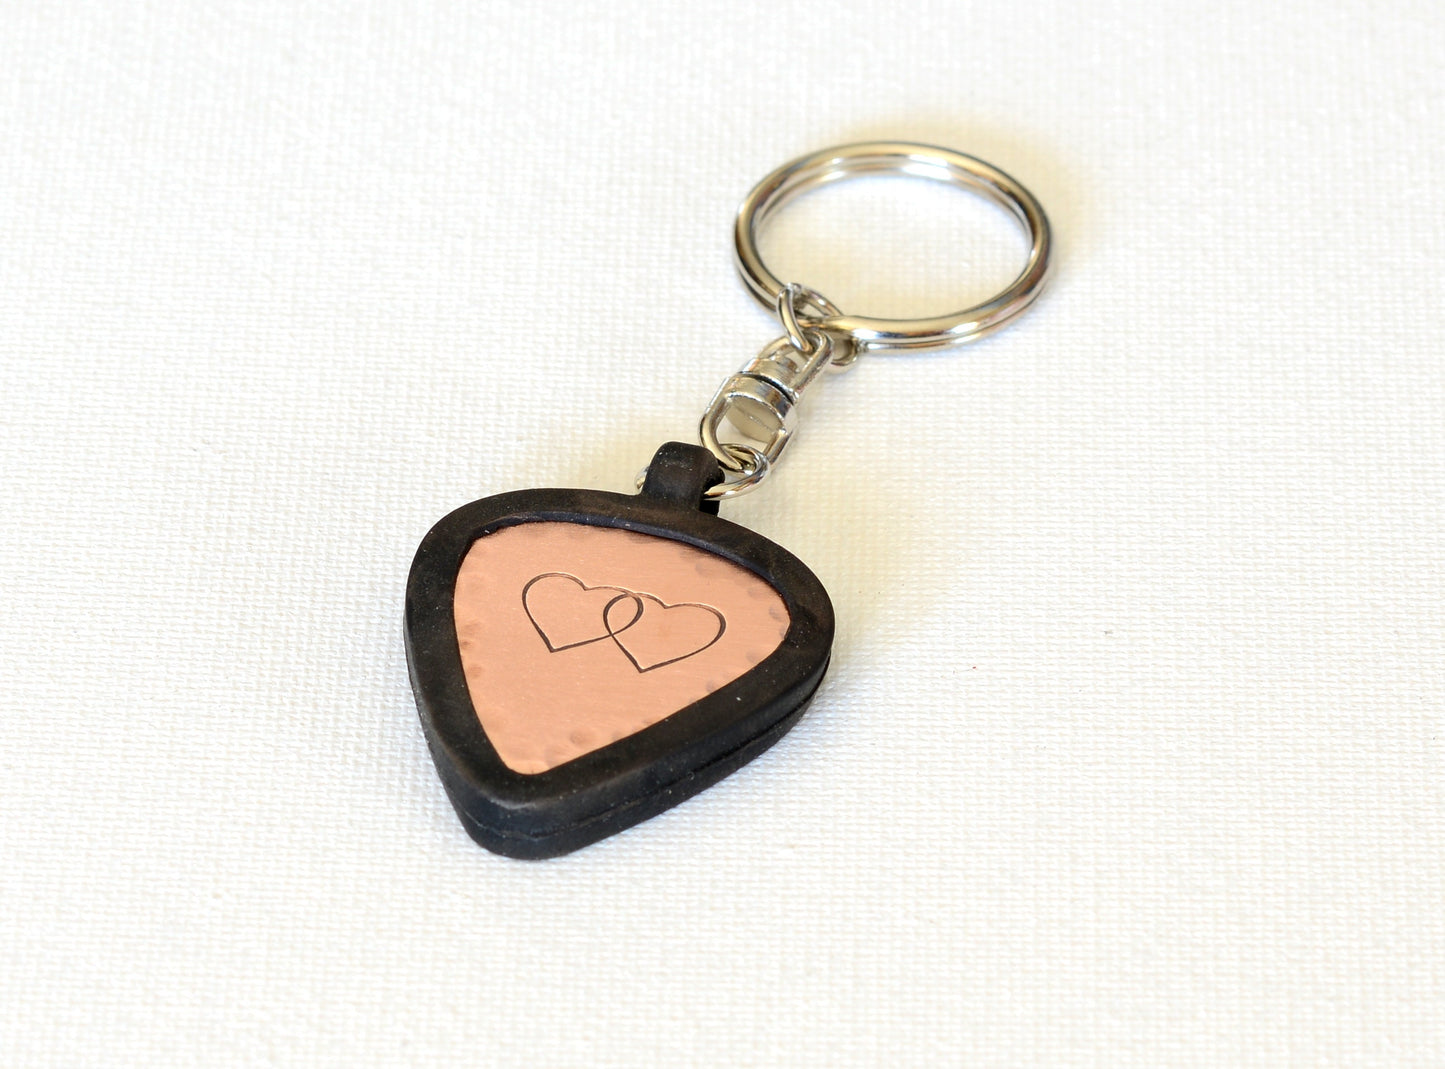 Copper guitar pick keychain with pick holder